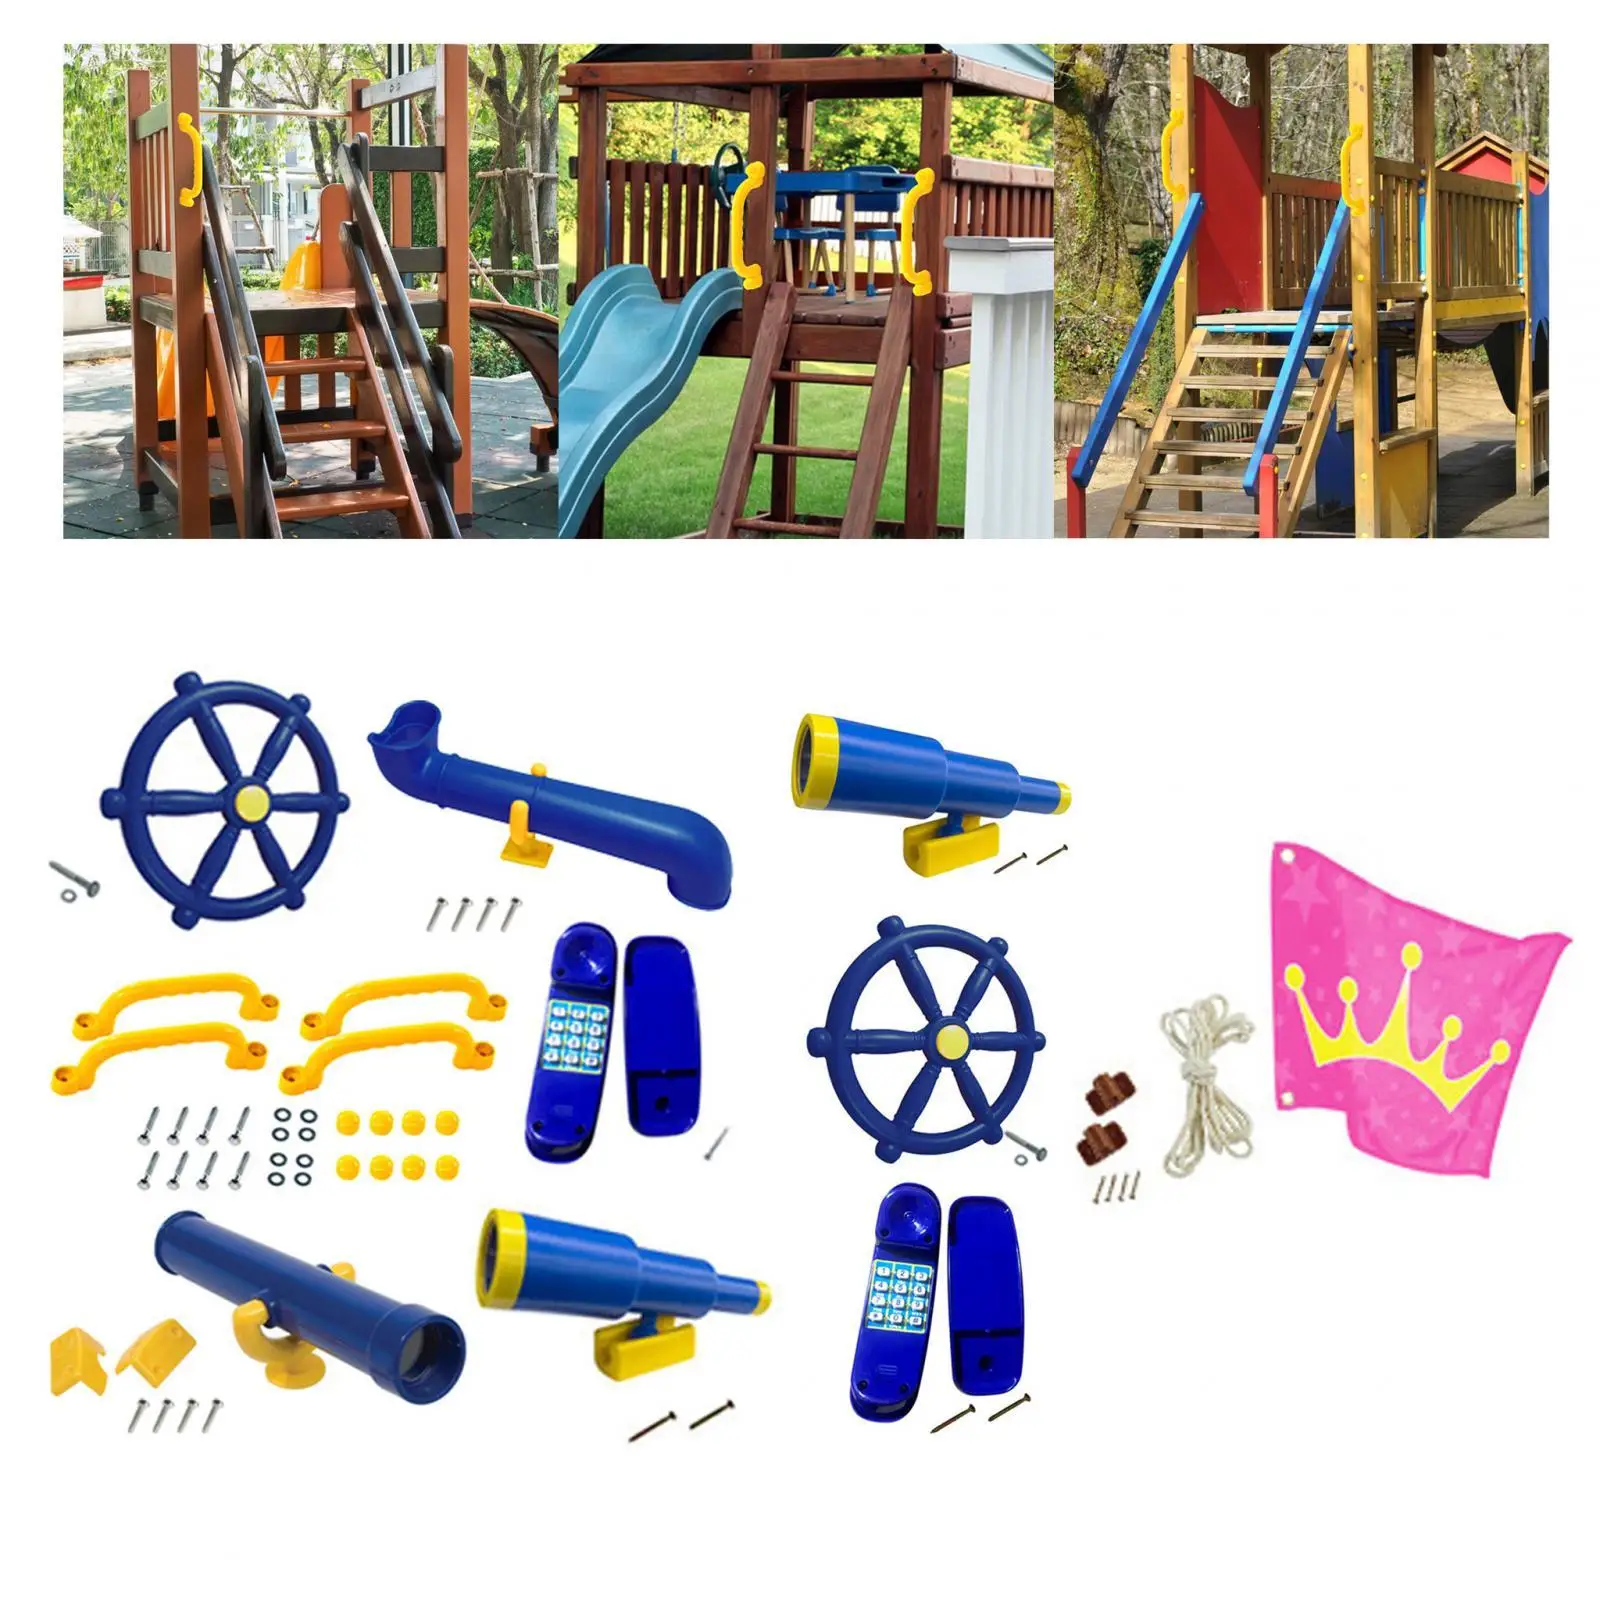 Playground Accessories Sports Toy Accessories Swingset Attachments for Backyard Treehouse Play House Birthday Gifts